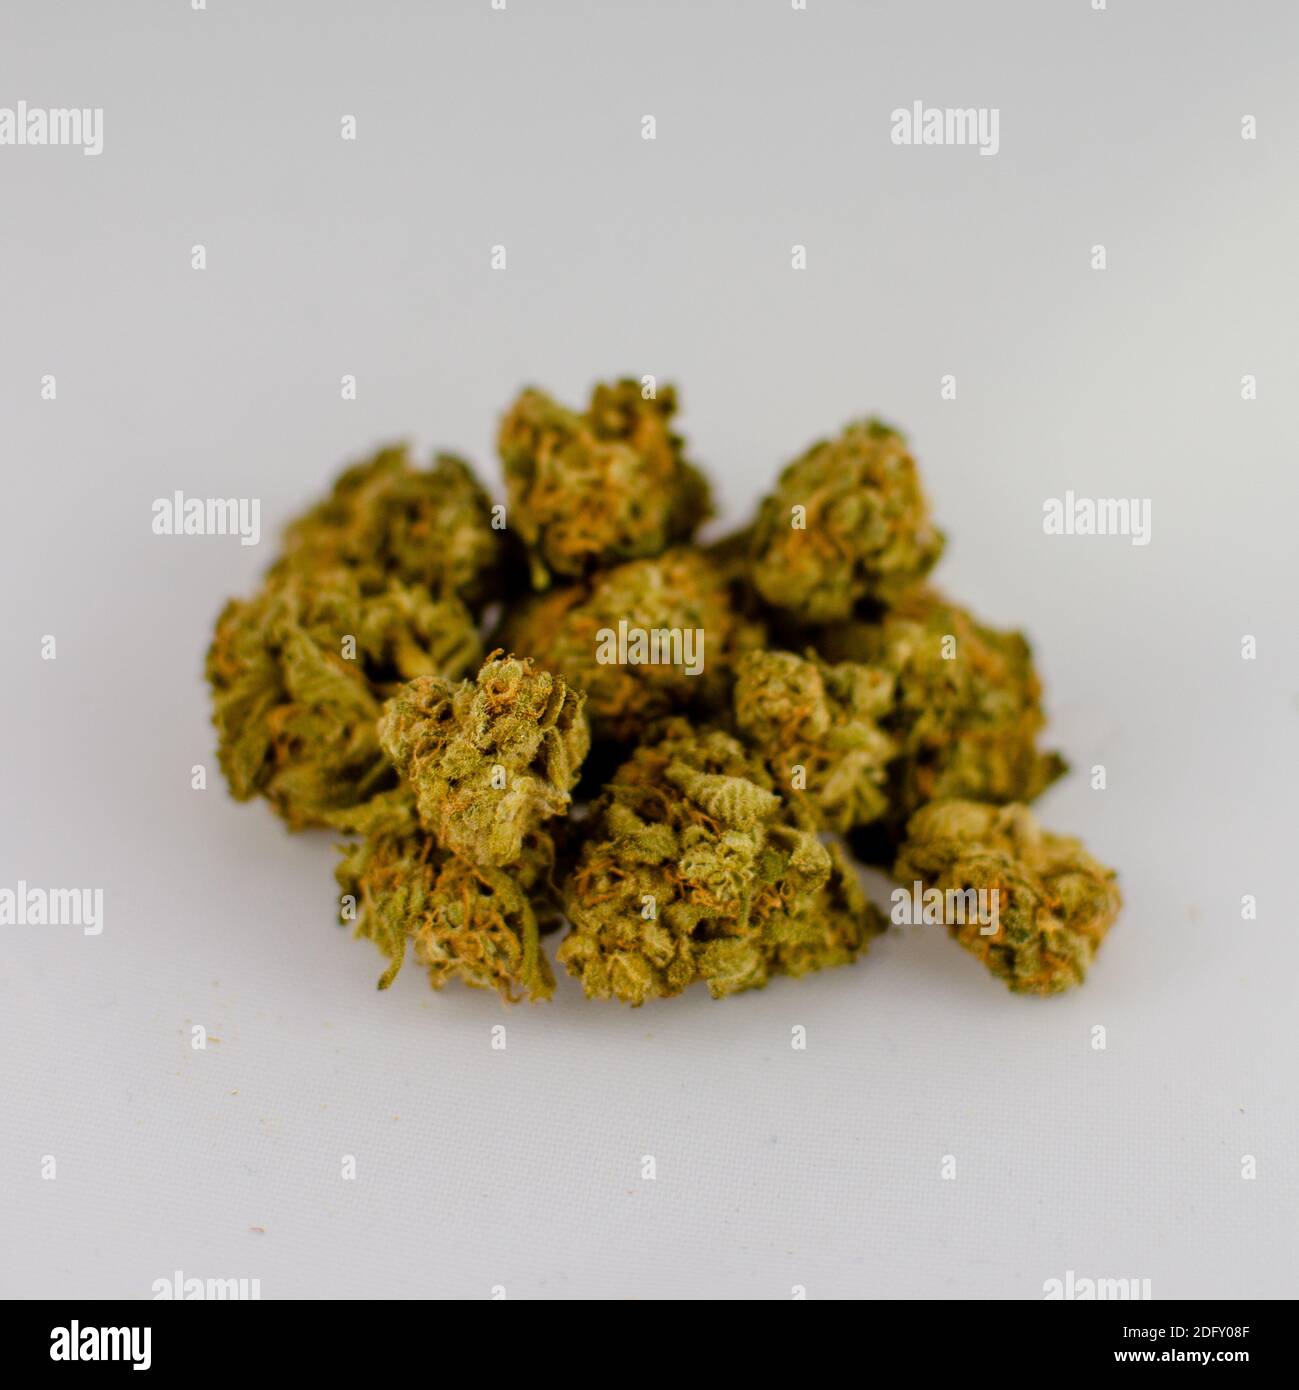 Close-up of La Strada Sativa strain dry flower cannabis buds in front of a white background Stock Photo